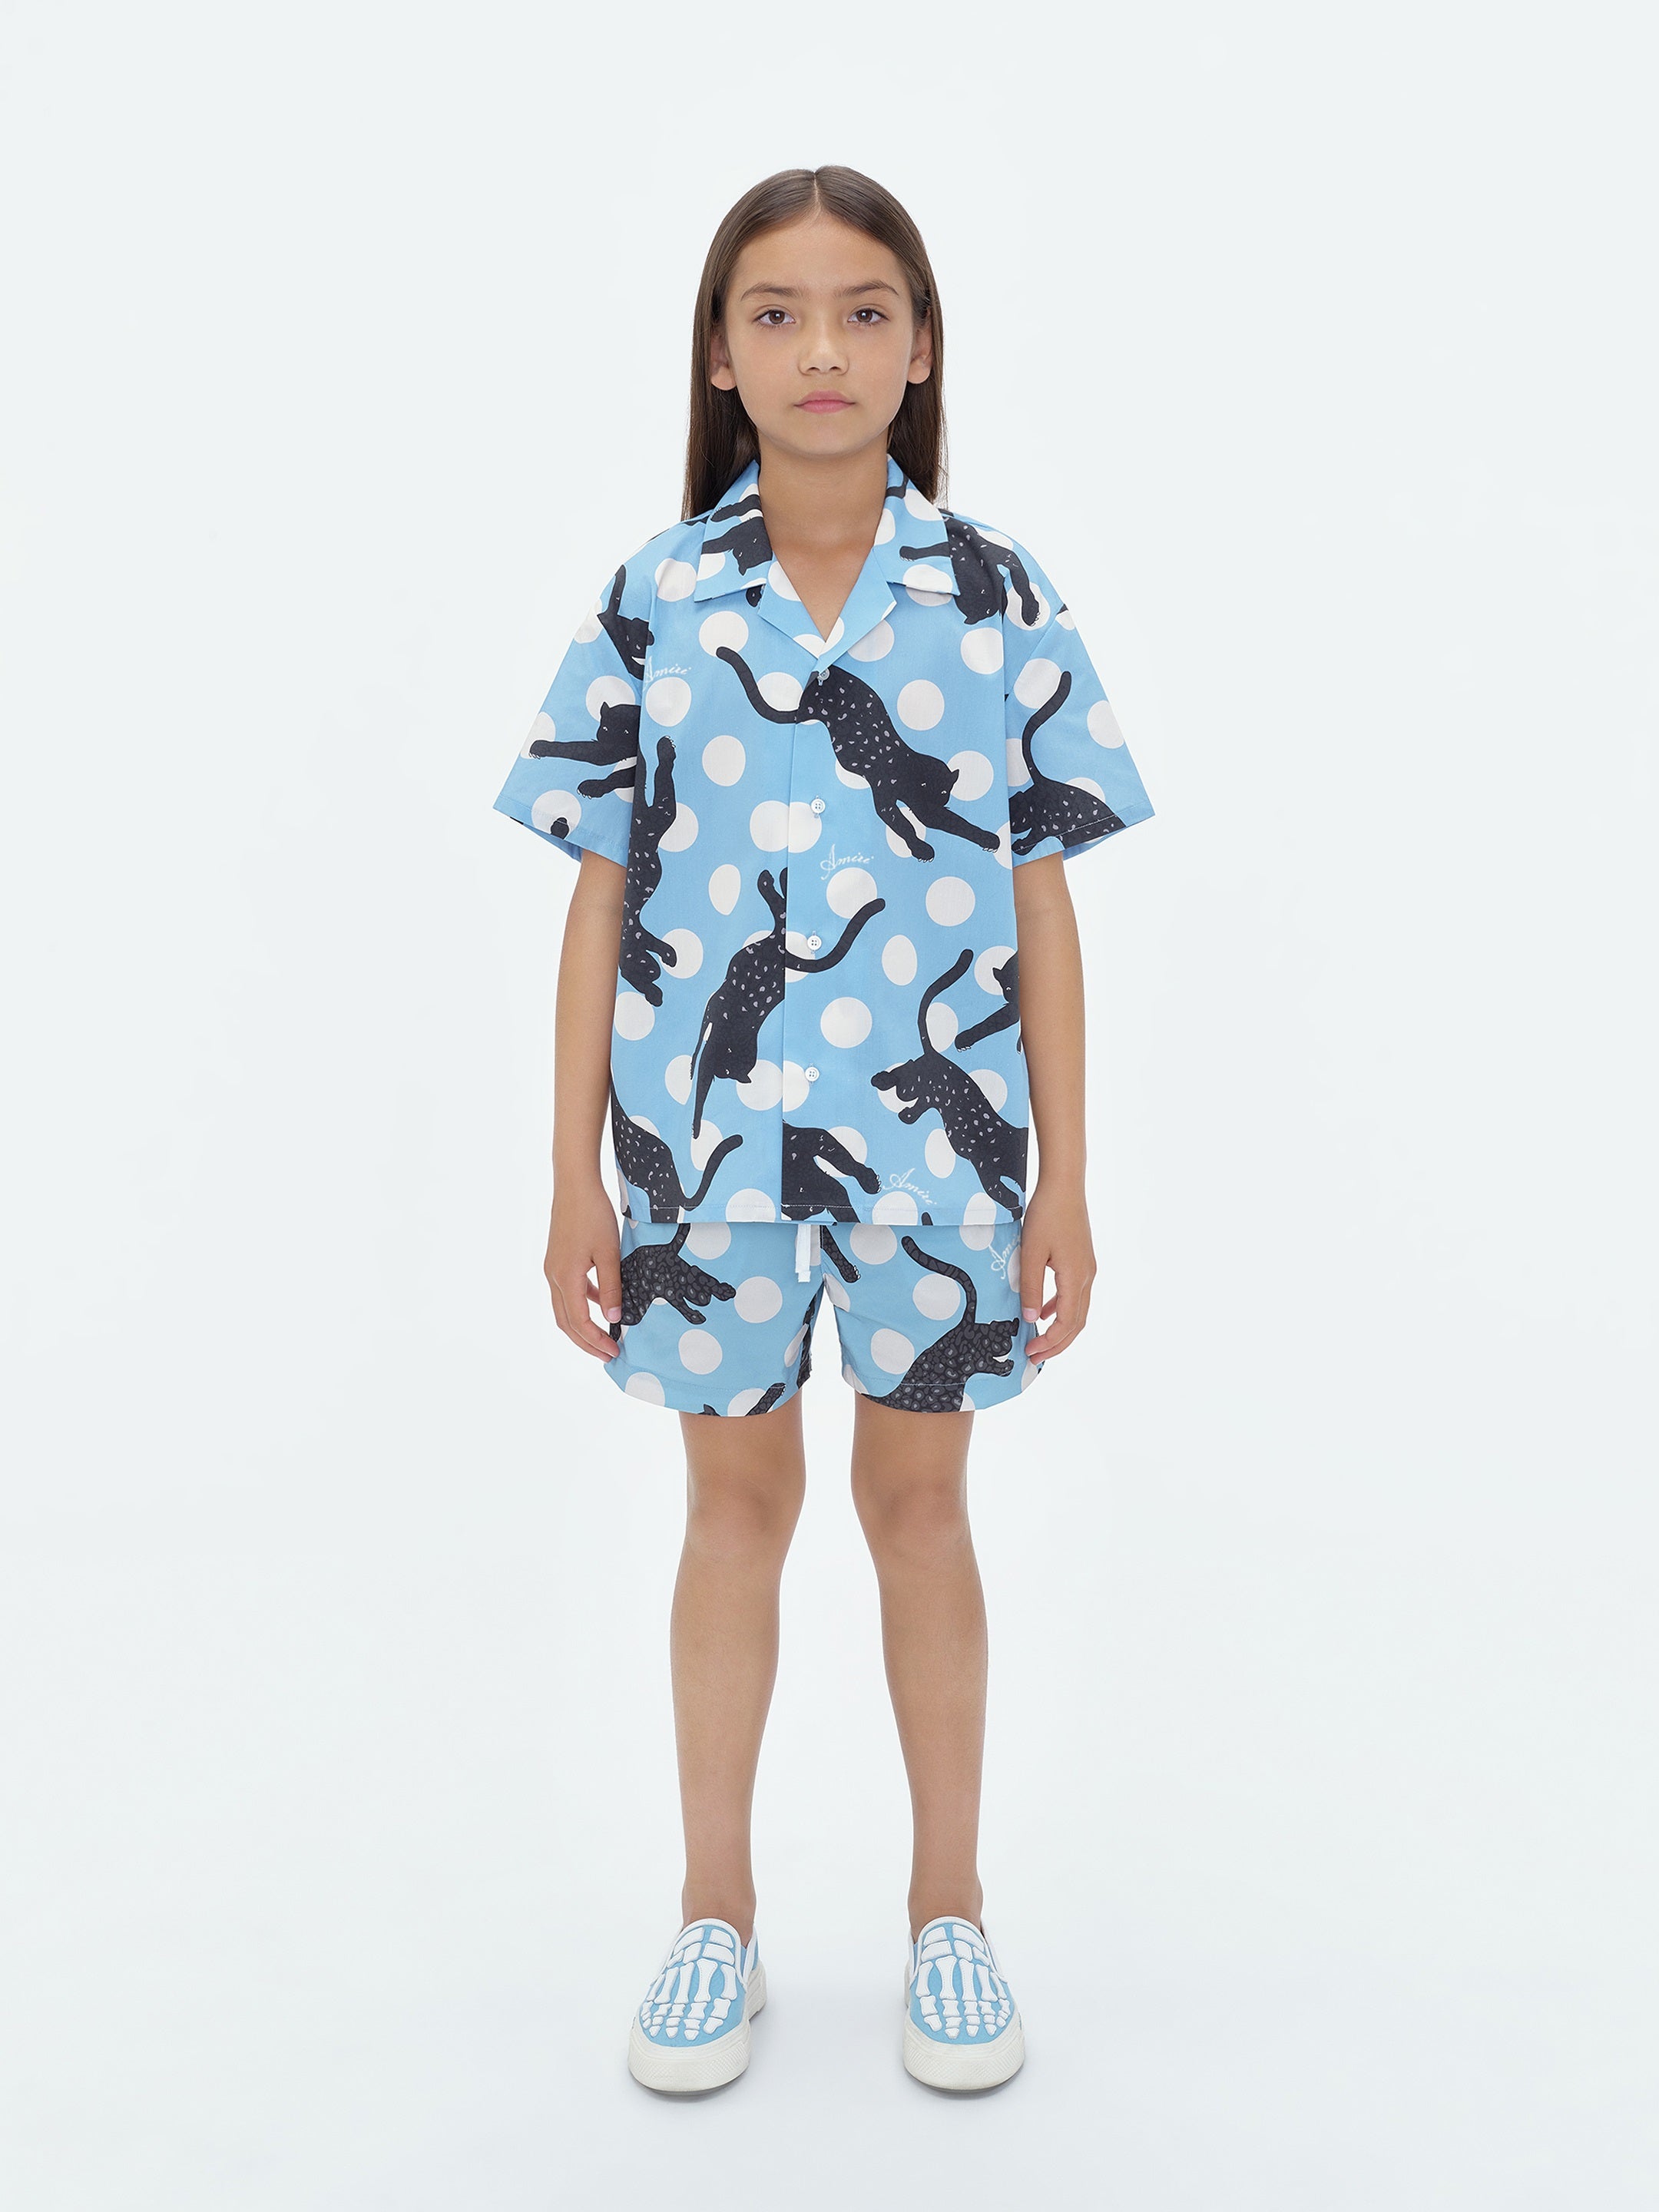 Product KIDS - LEOPARD POLKA DOTS S/S SHIRT - Air Blue featured image